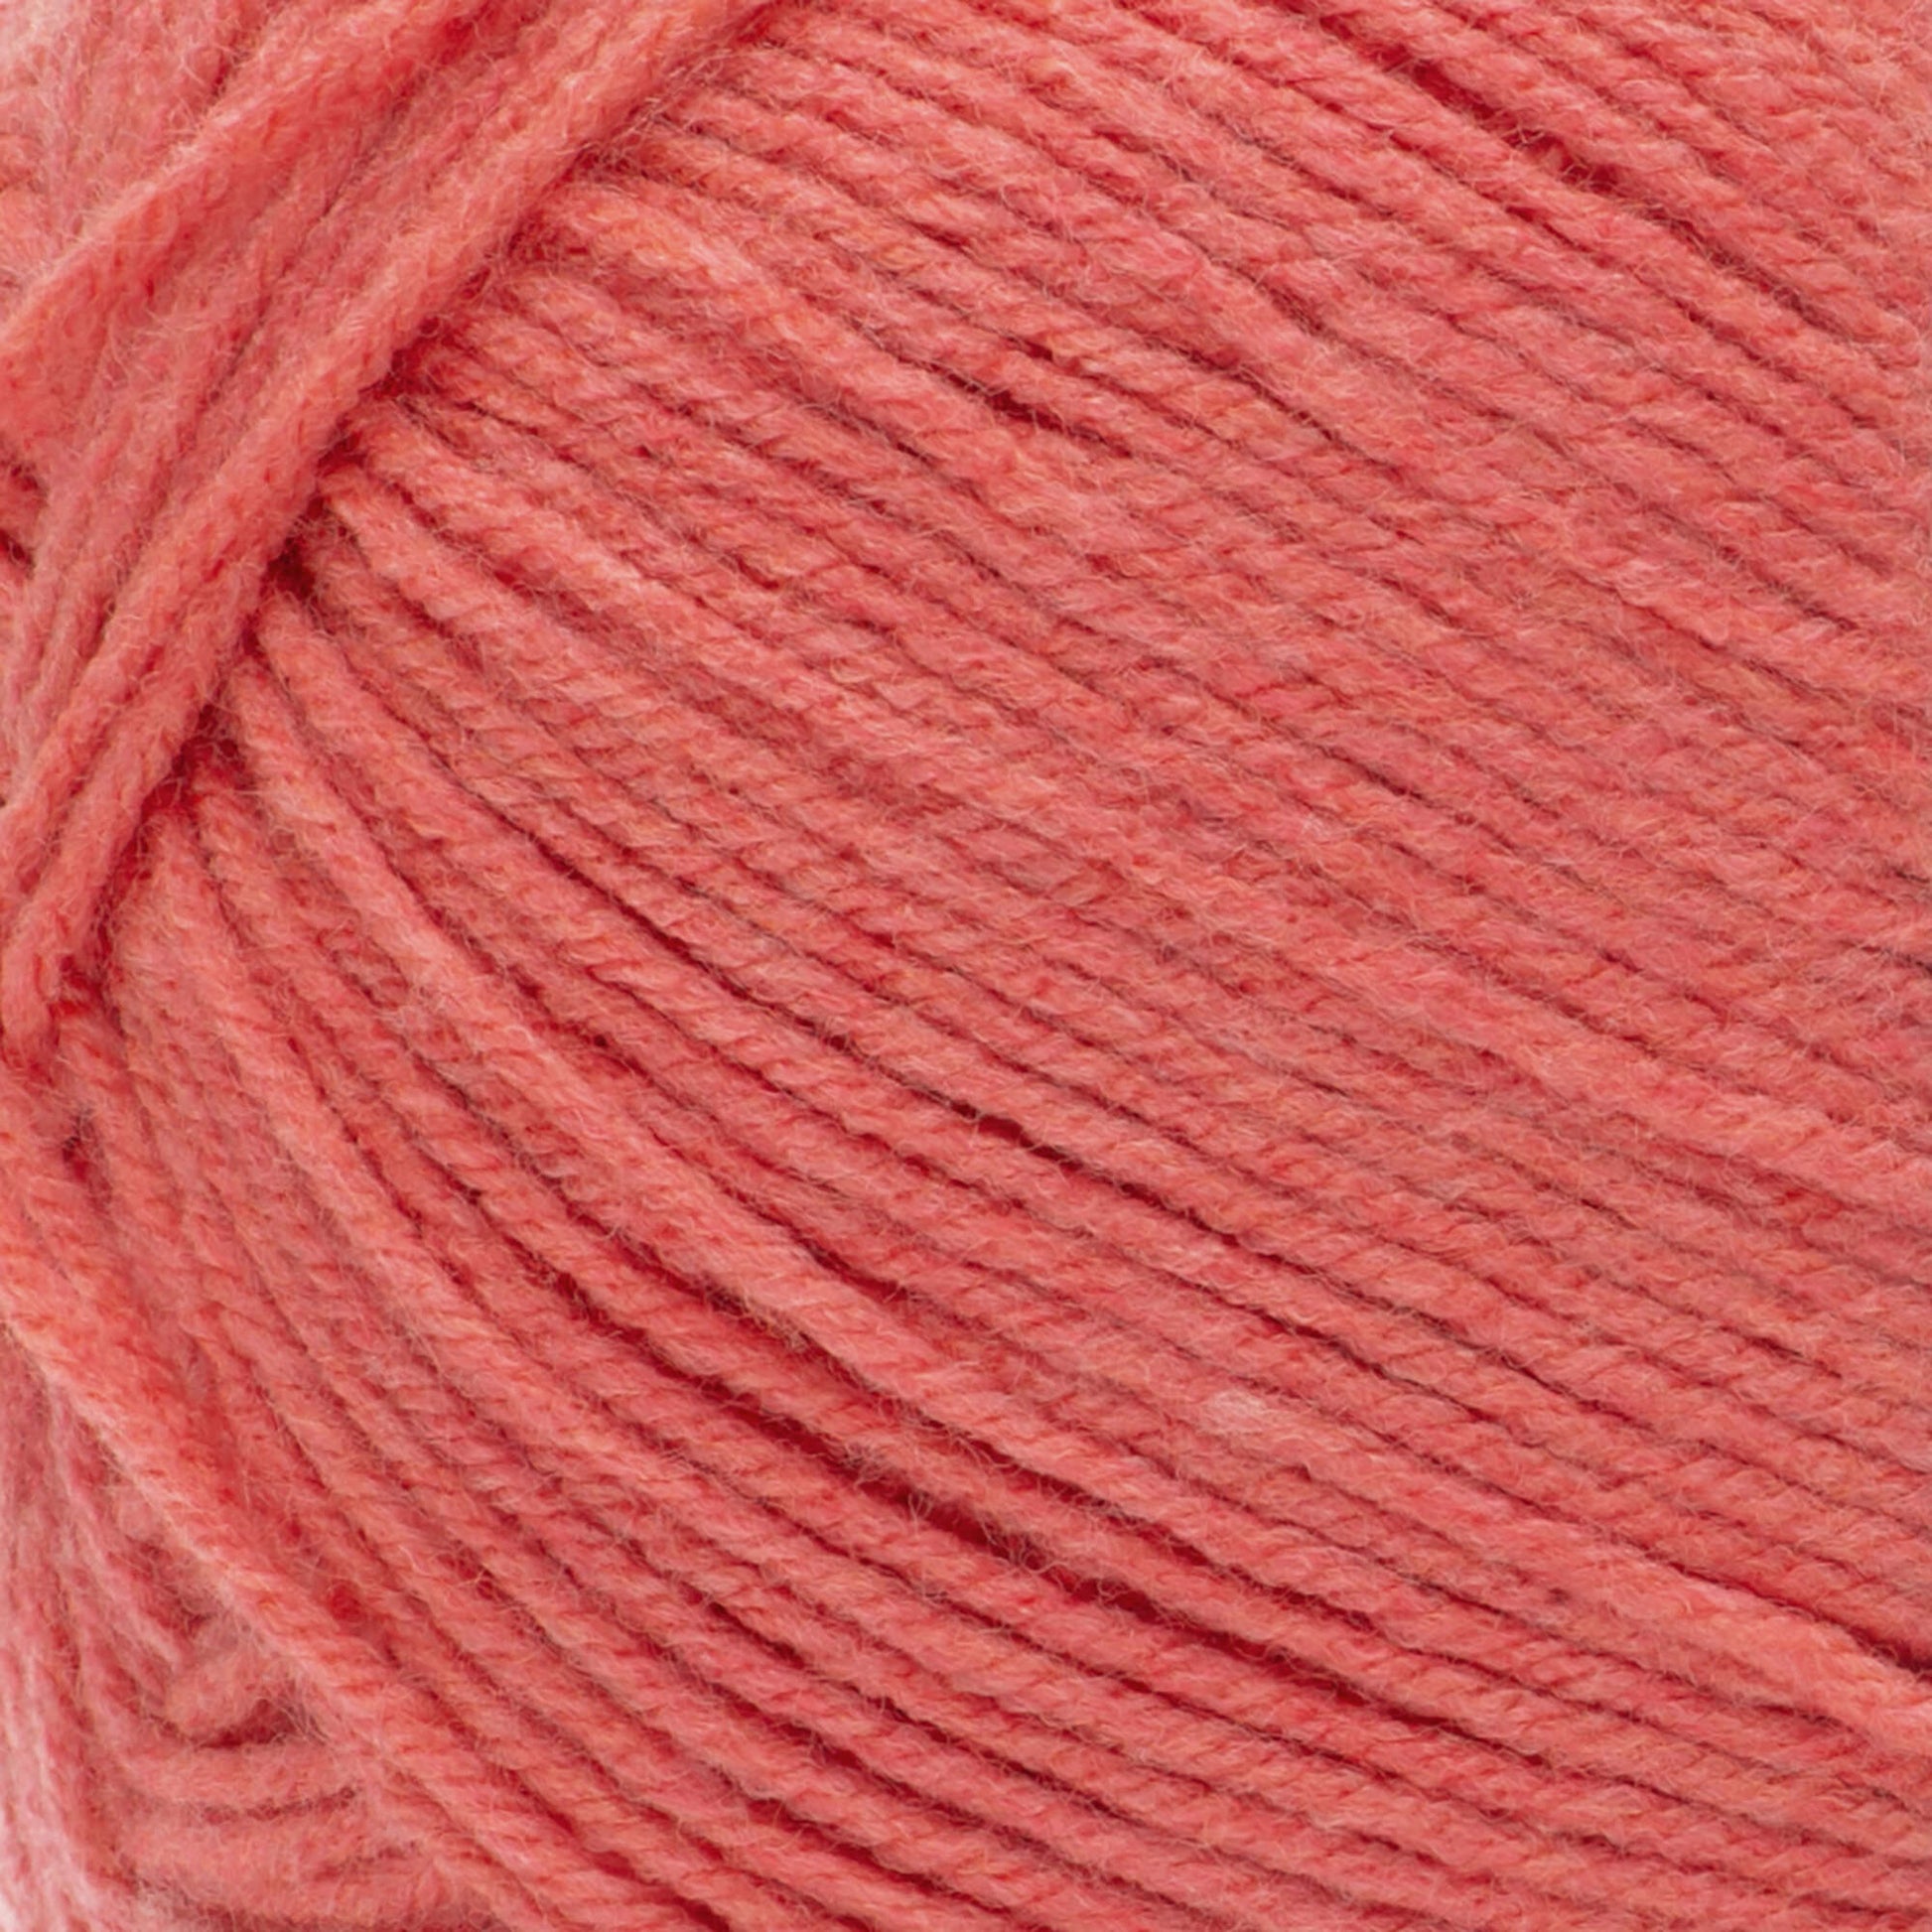 Red Heart Bunches of Hugs Yarn - Discontinued Shades